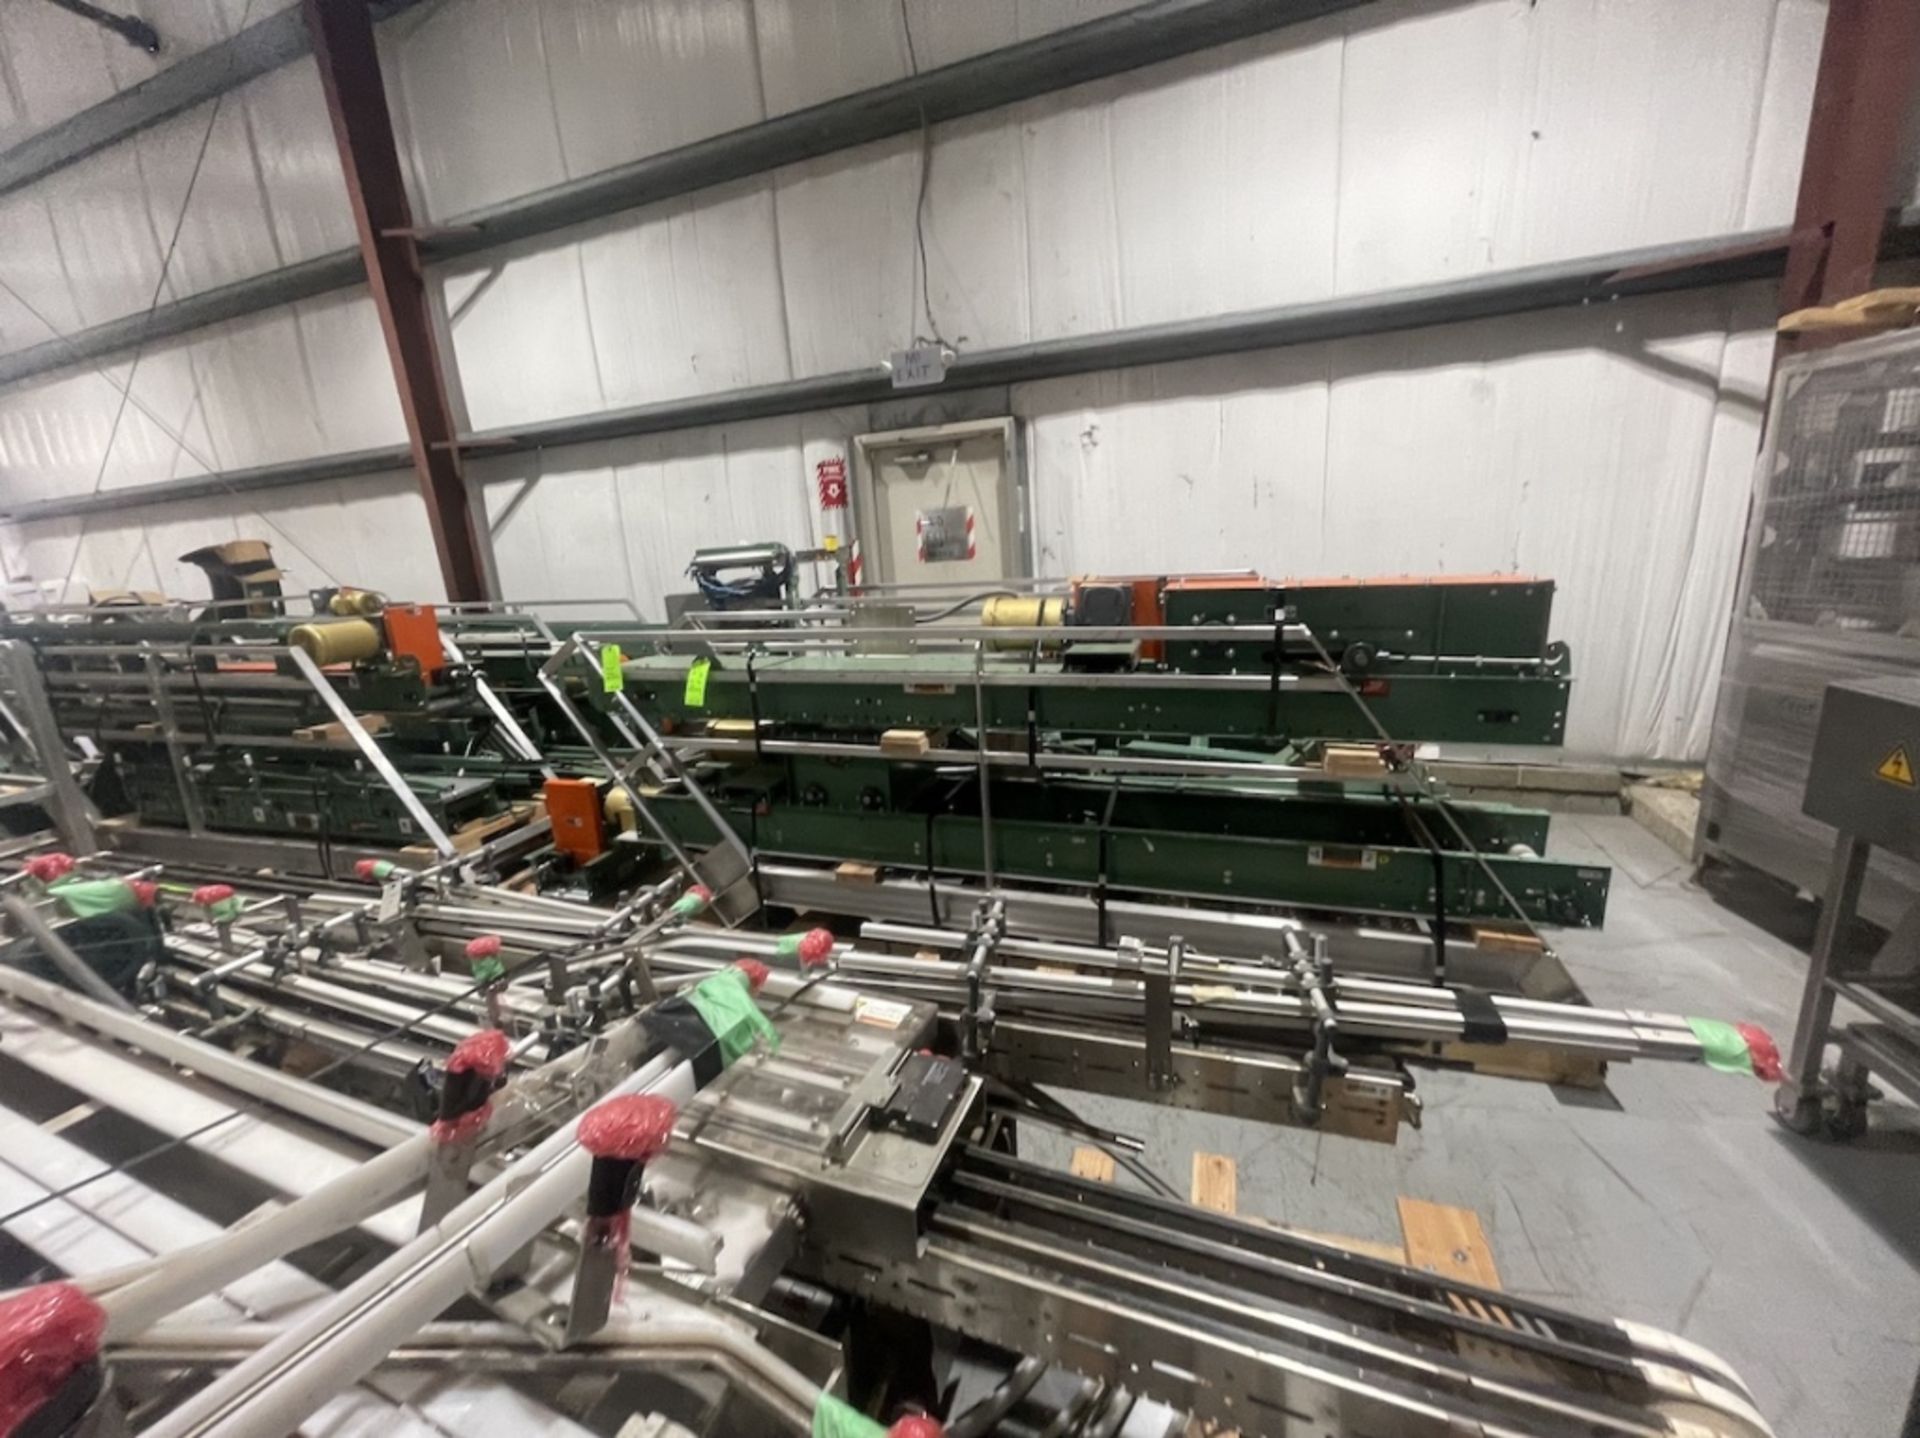 CASE CONVEYOR SYSTEMS ON PRODUCTION LINE (2019 MFG)(Loading, Handling & Site Management Fee: $1250. - Image 7 of 11